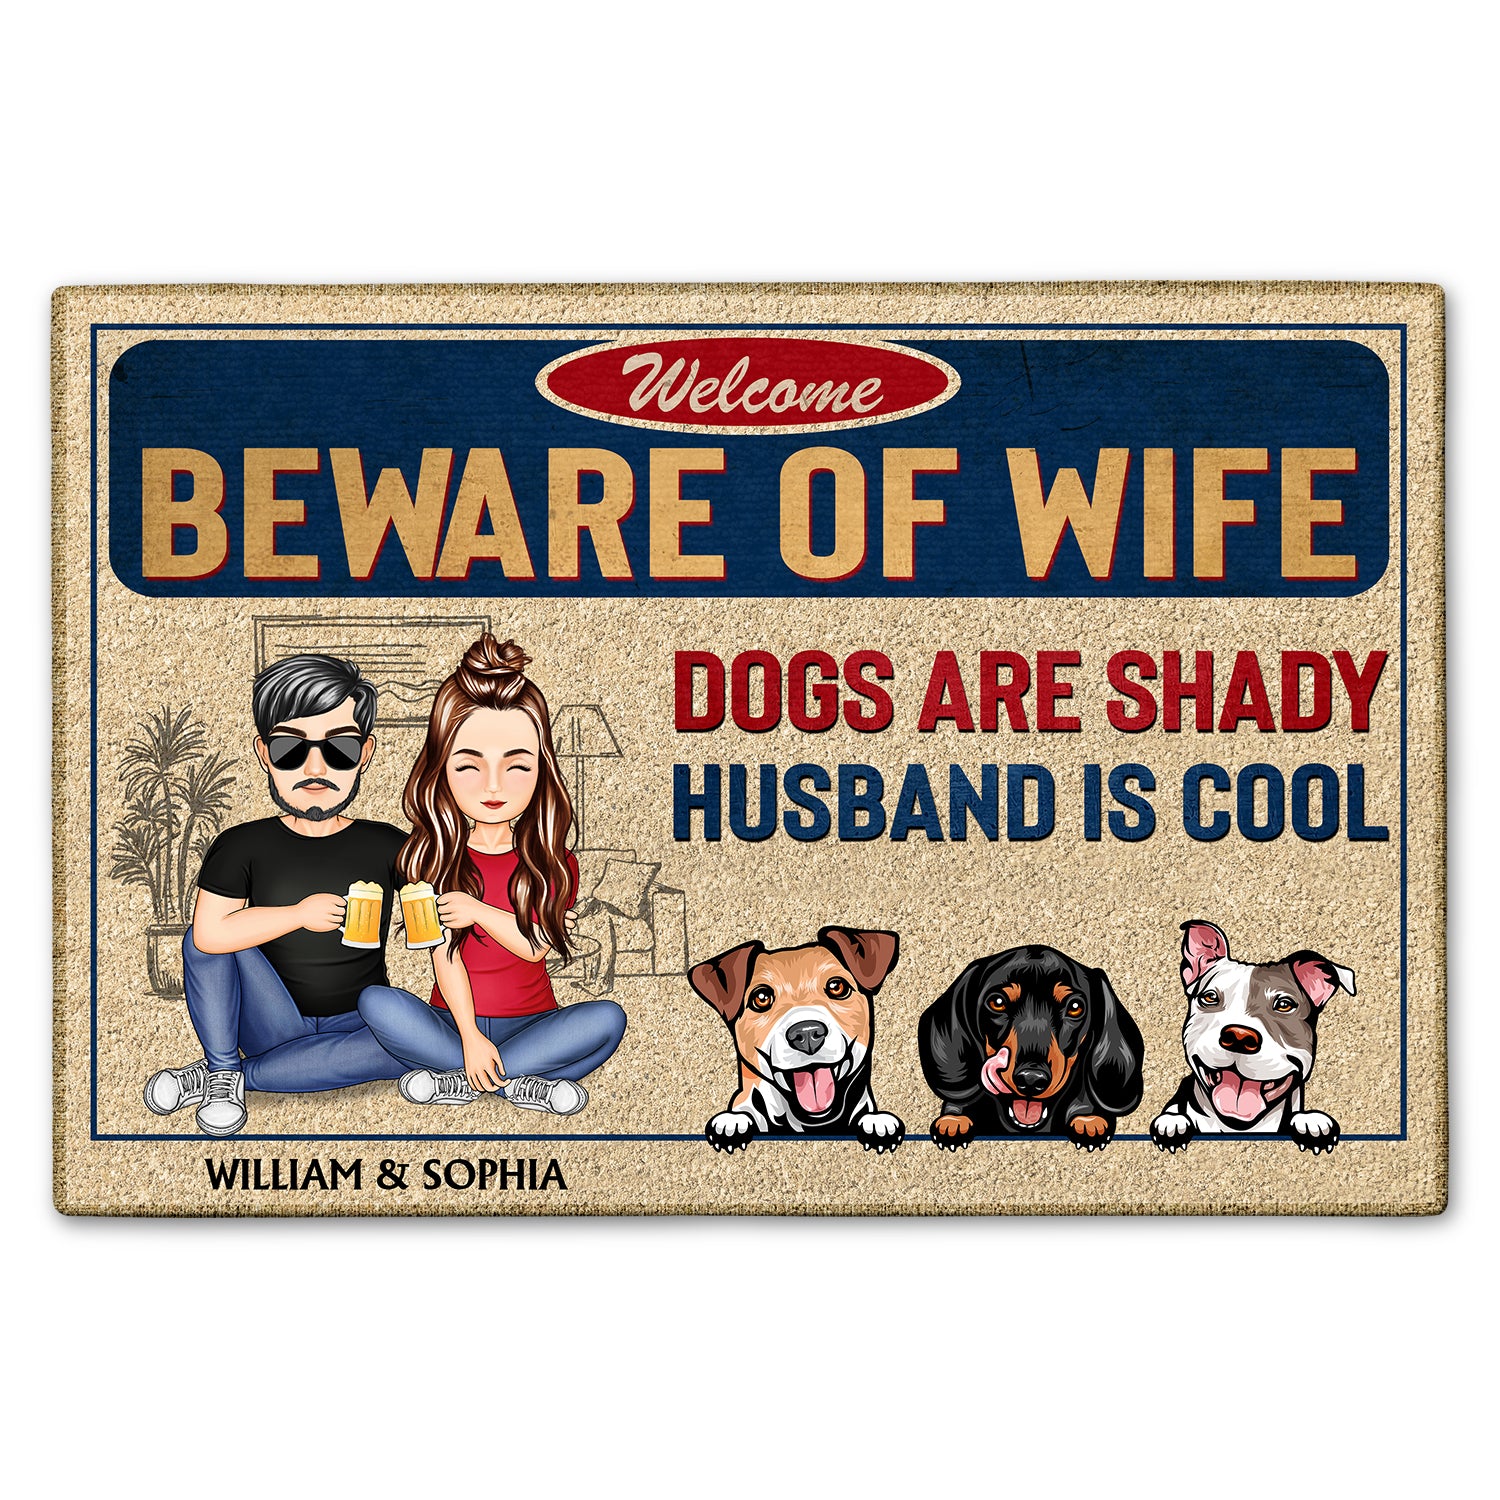 Beware Of Wife Dogs Cats Are Shady Husband Is Cool - Anniversary, Birthday, Home Decor Gift For Husband, Wife, Couple, Pet Lovers - Personalized Custom Doormat